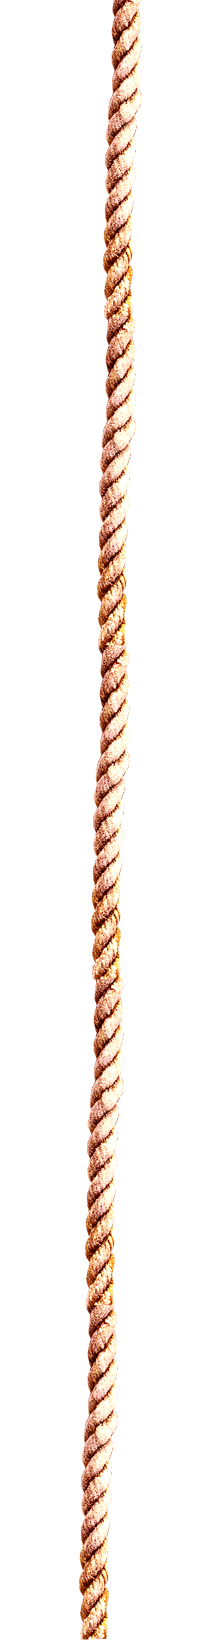 Images of Rope | 1181x472